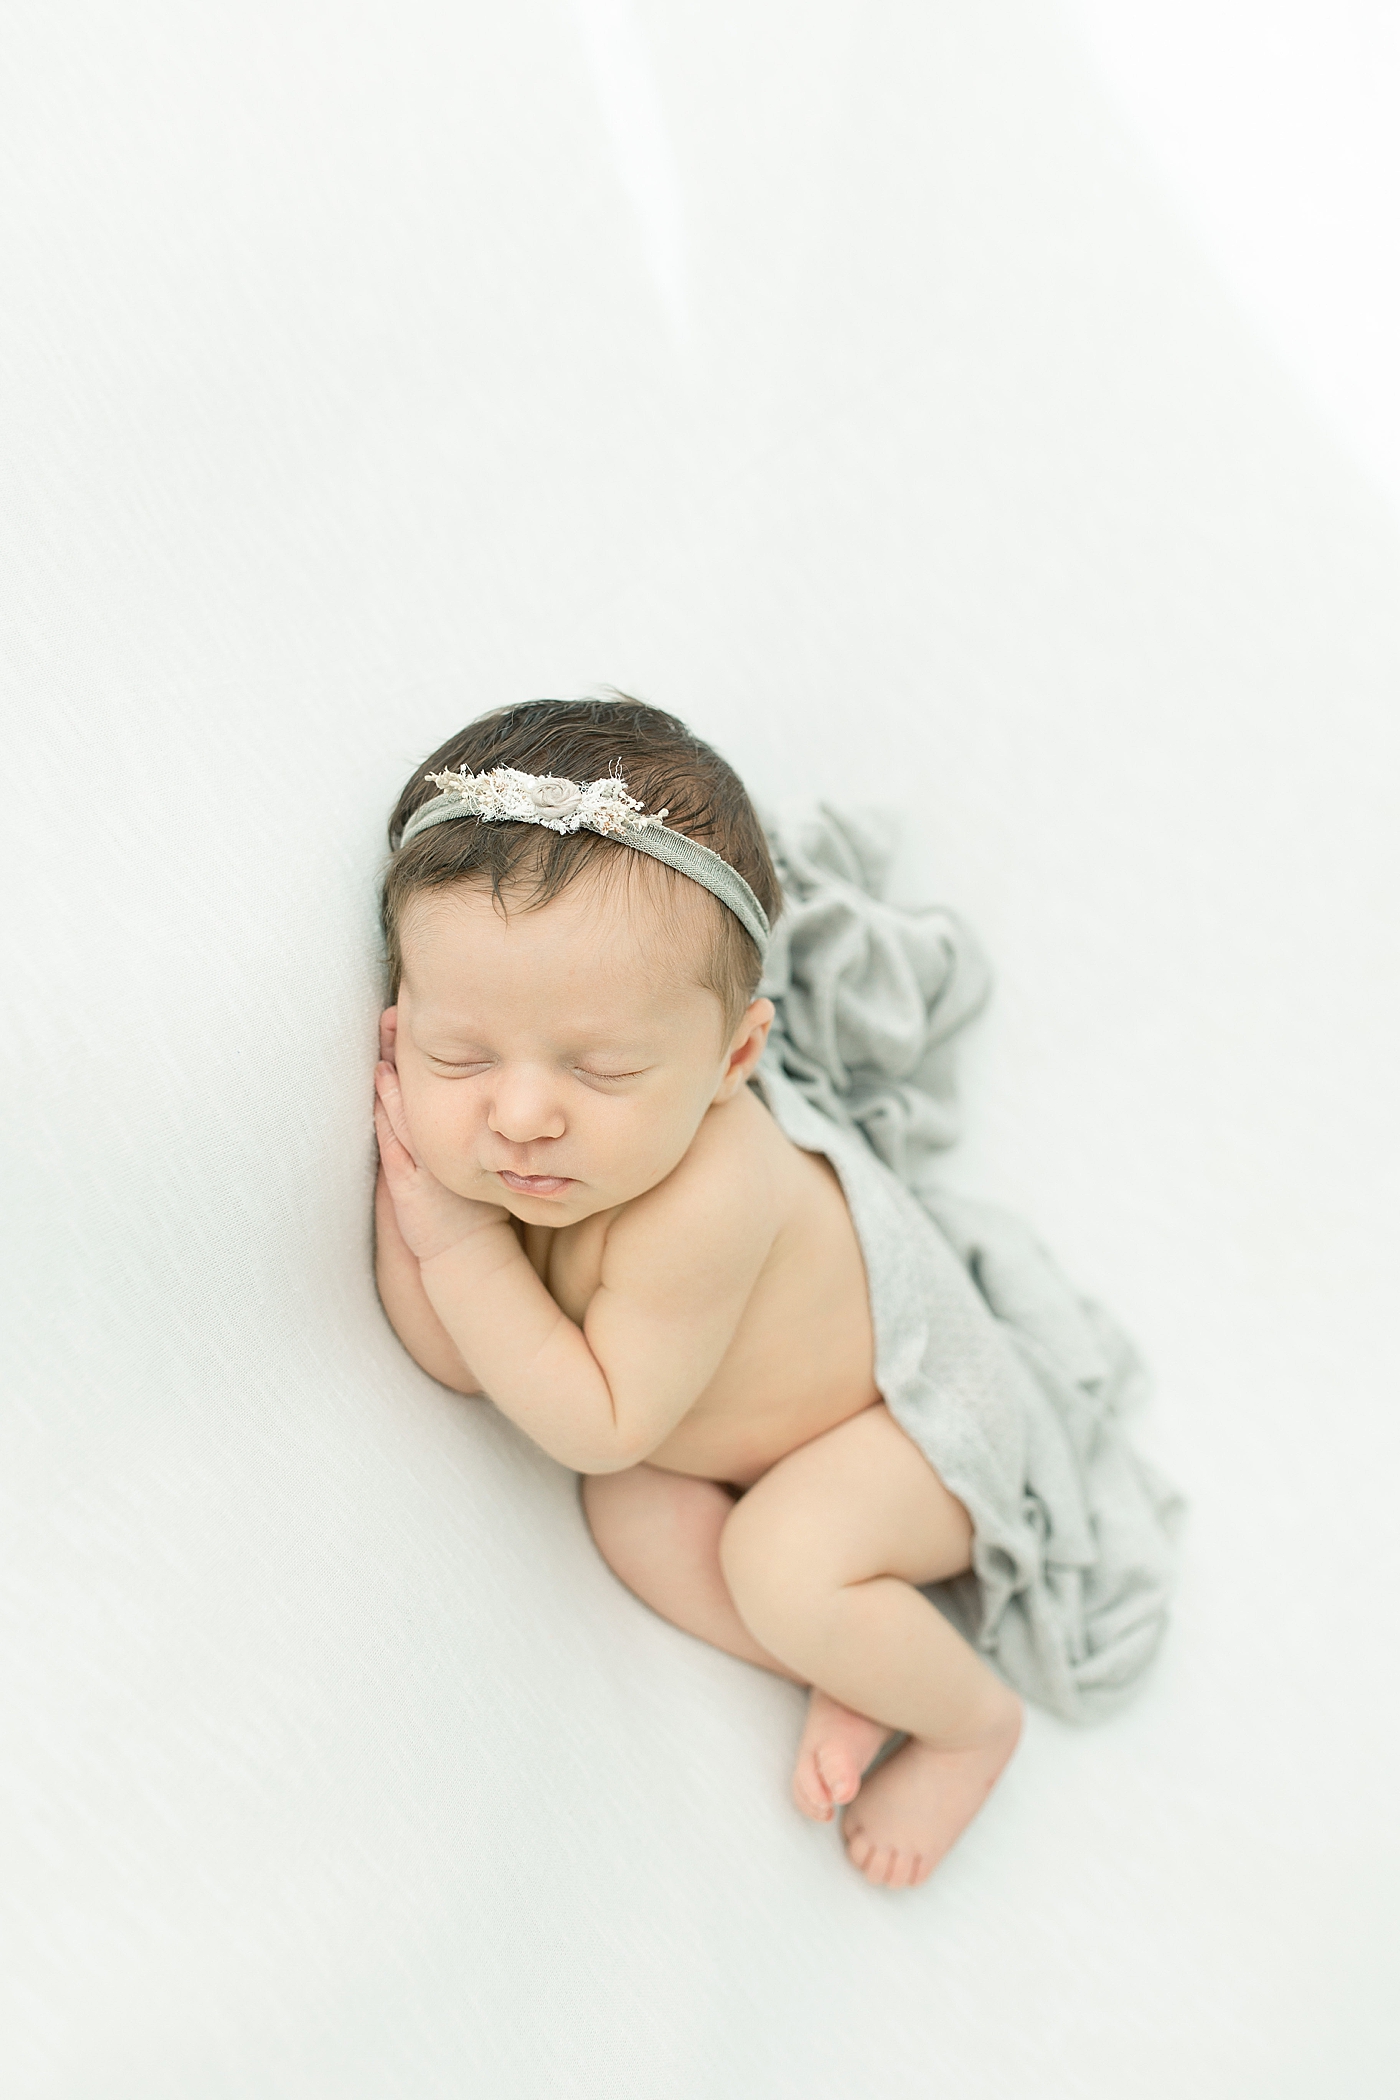 Newborn baby girl in gray swaddle | Photo by Little Sunshine Photography 